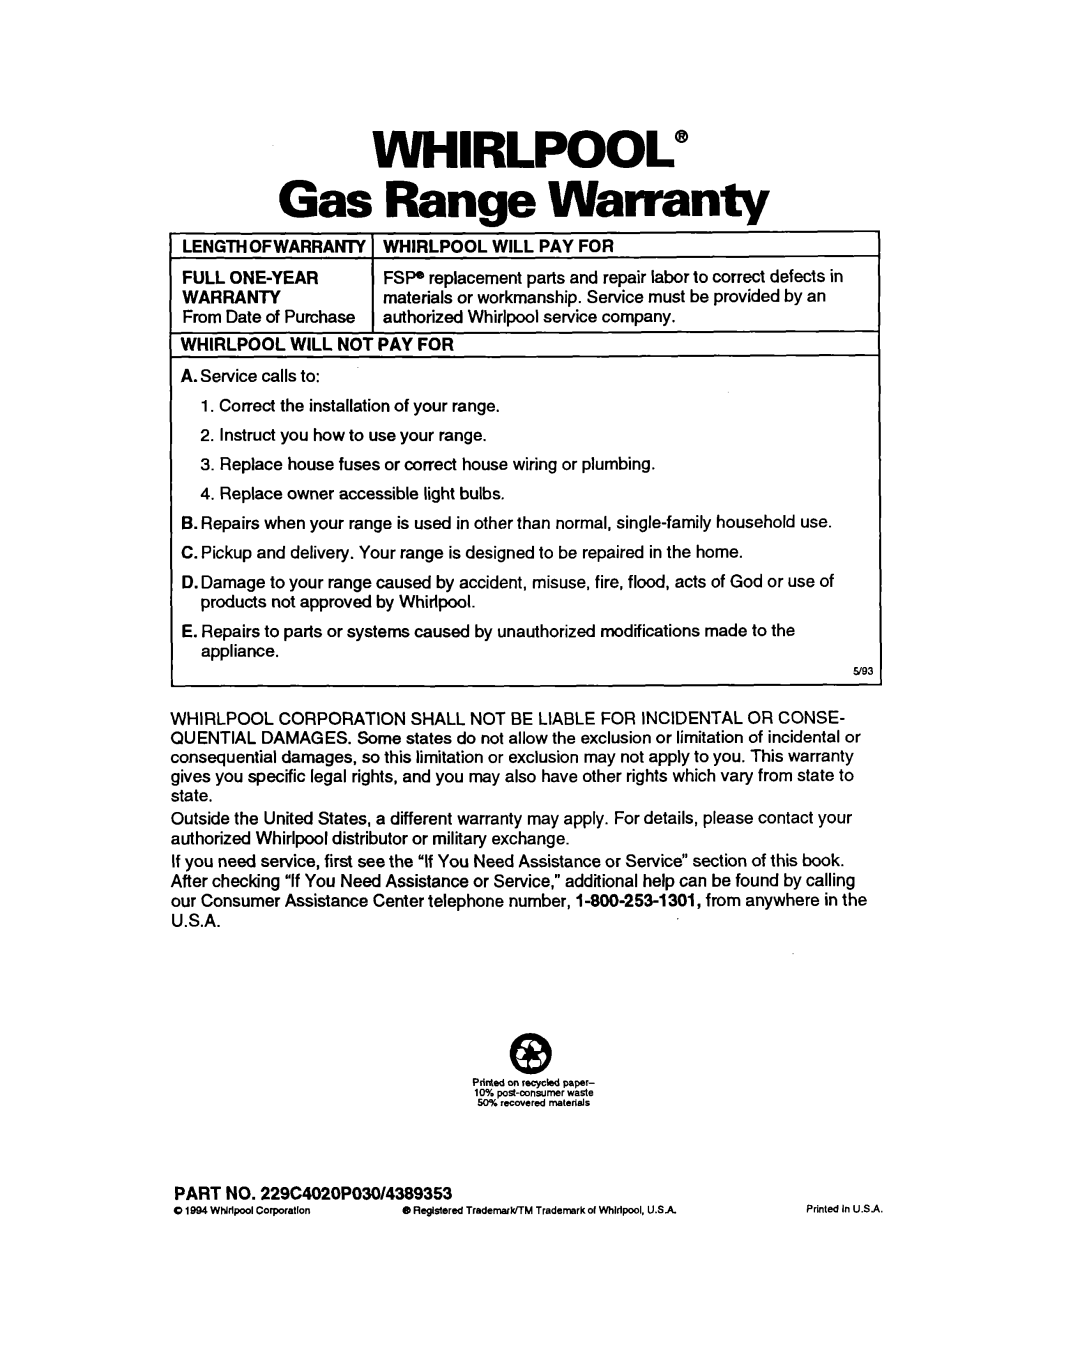 Whirlpool SS385PEB WHIRLPOOL” Gas Range Warranty, LENGTHOFWARRANlY WHIRLPOOL WILL PAY FOR, Whirlpool Will Not Pay For 